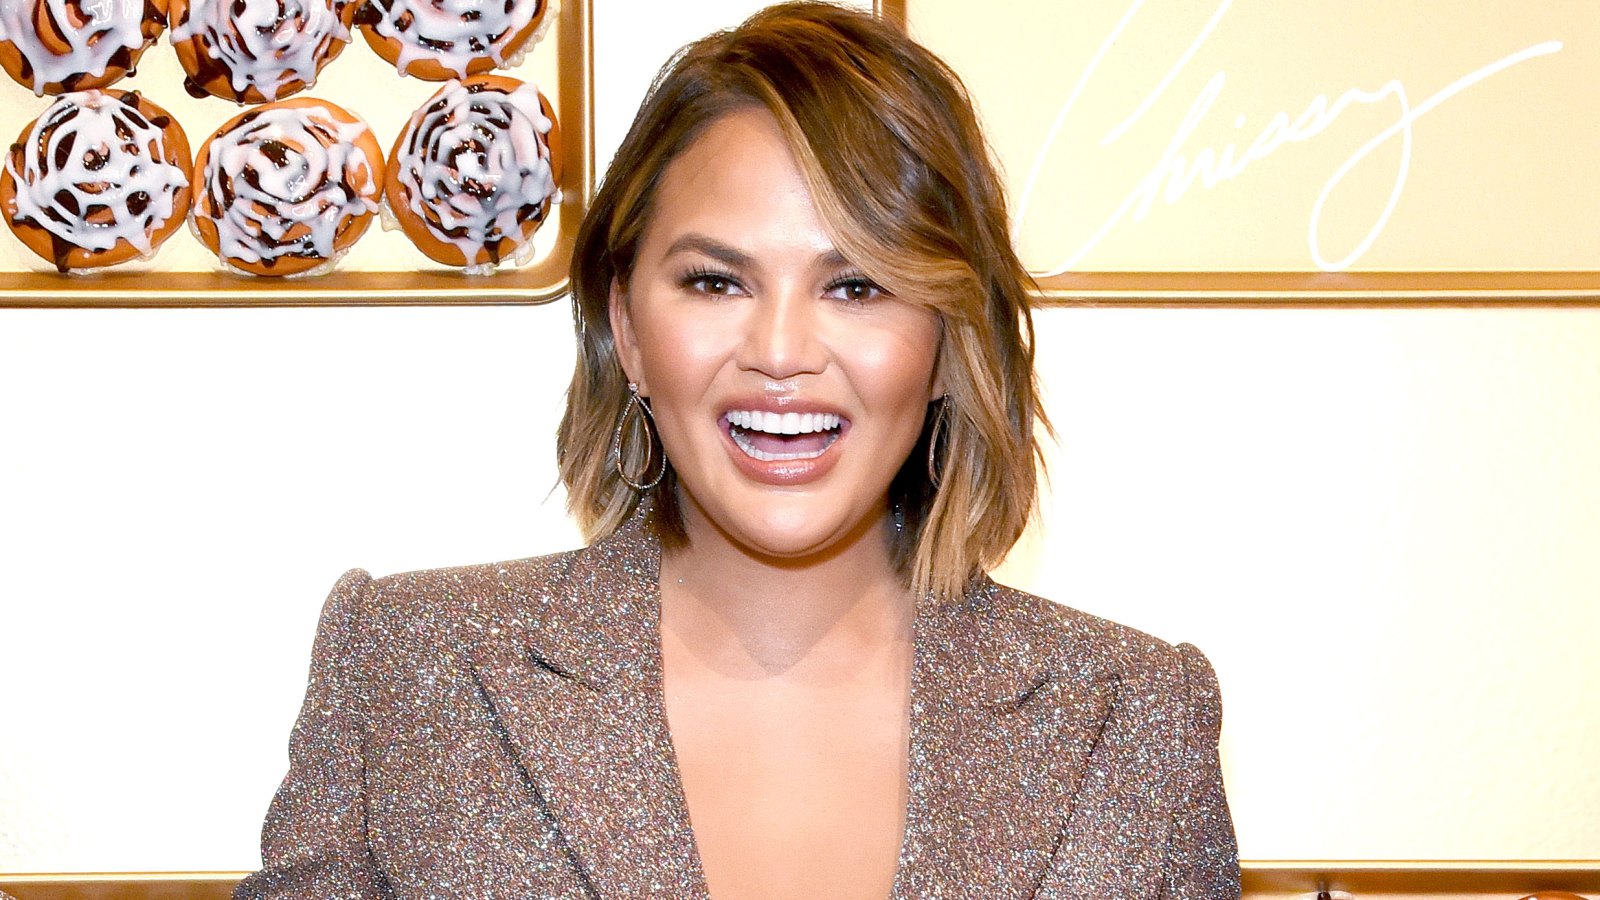 Chrissy Teigen to Headline PopSugar’s Play/Ground Festival: ‘I Hope It Gets Real and Raw’